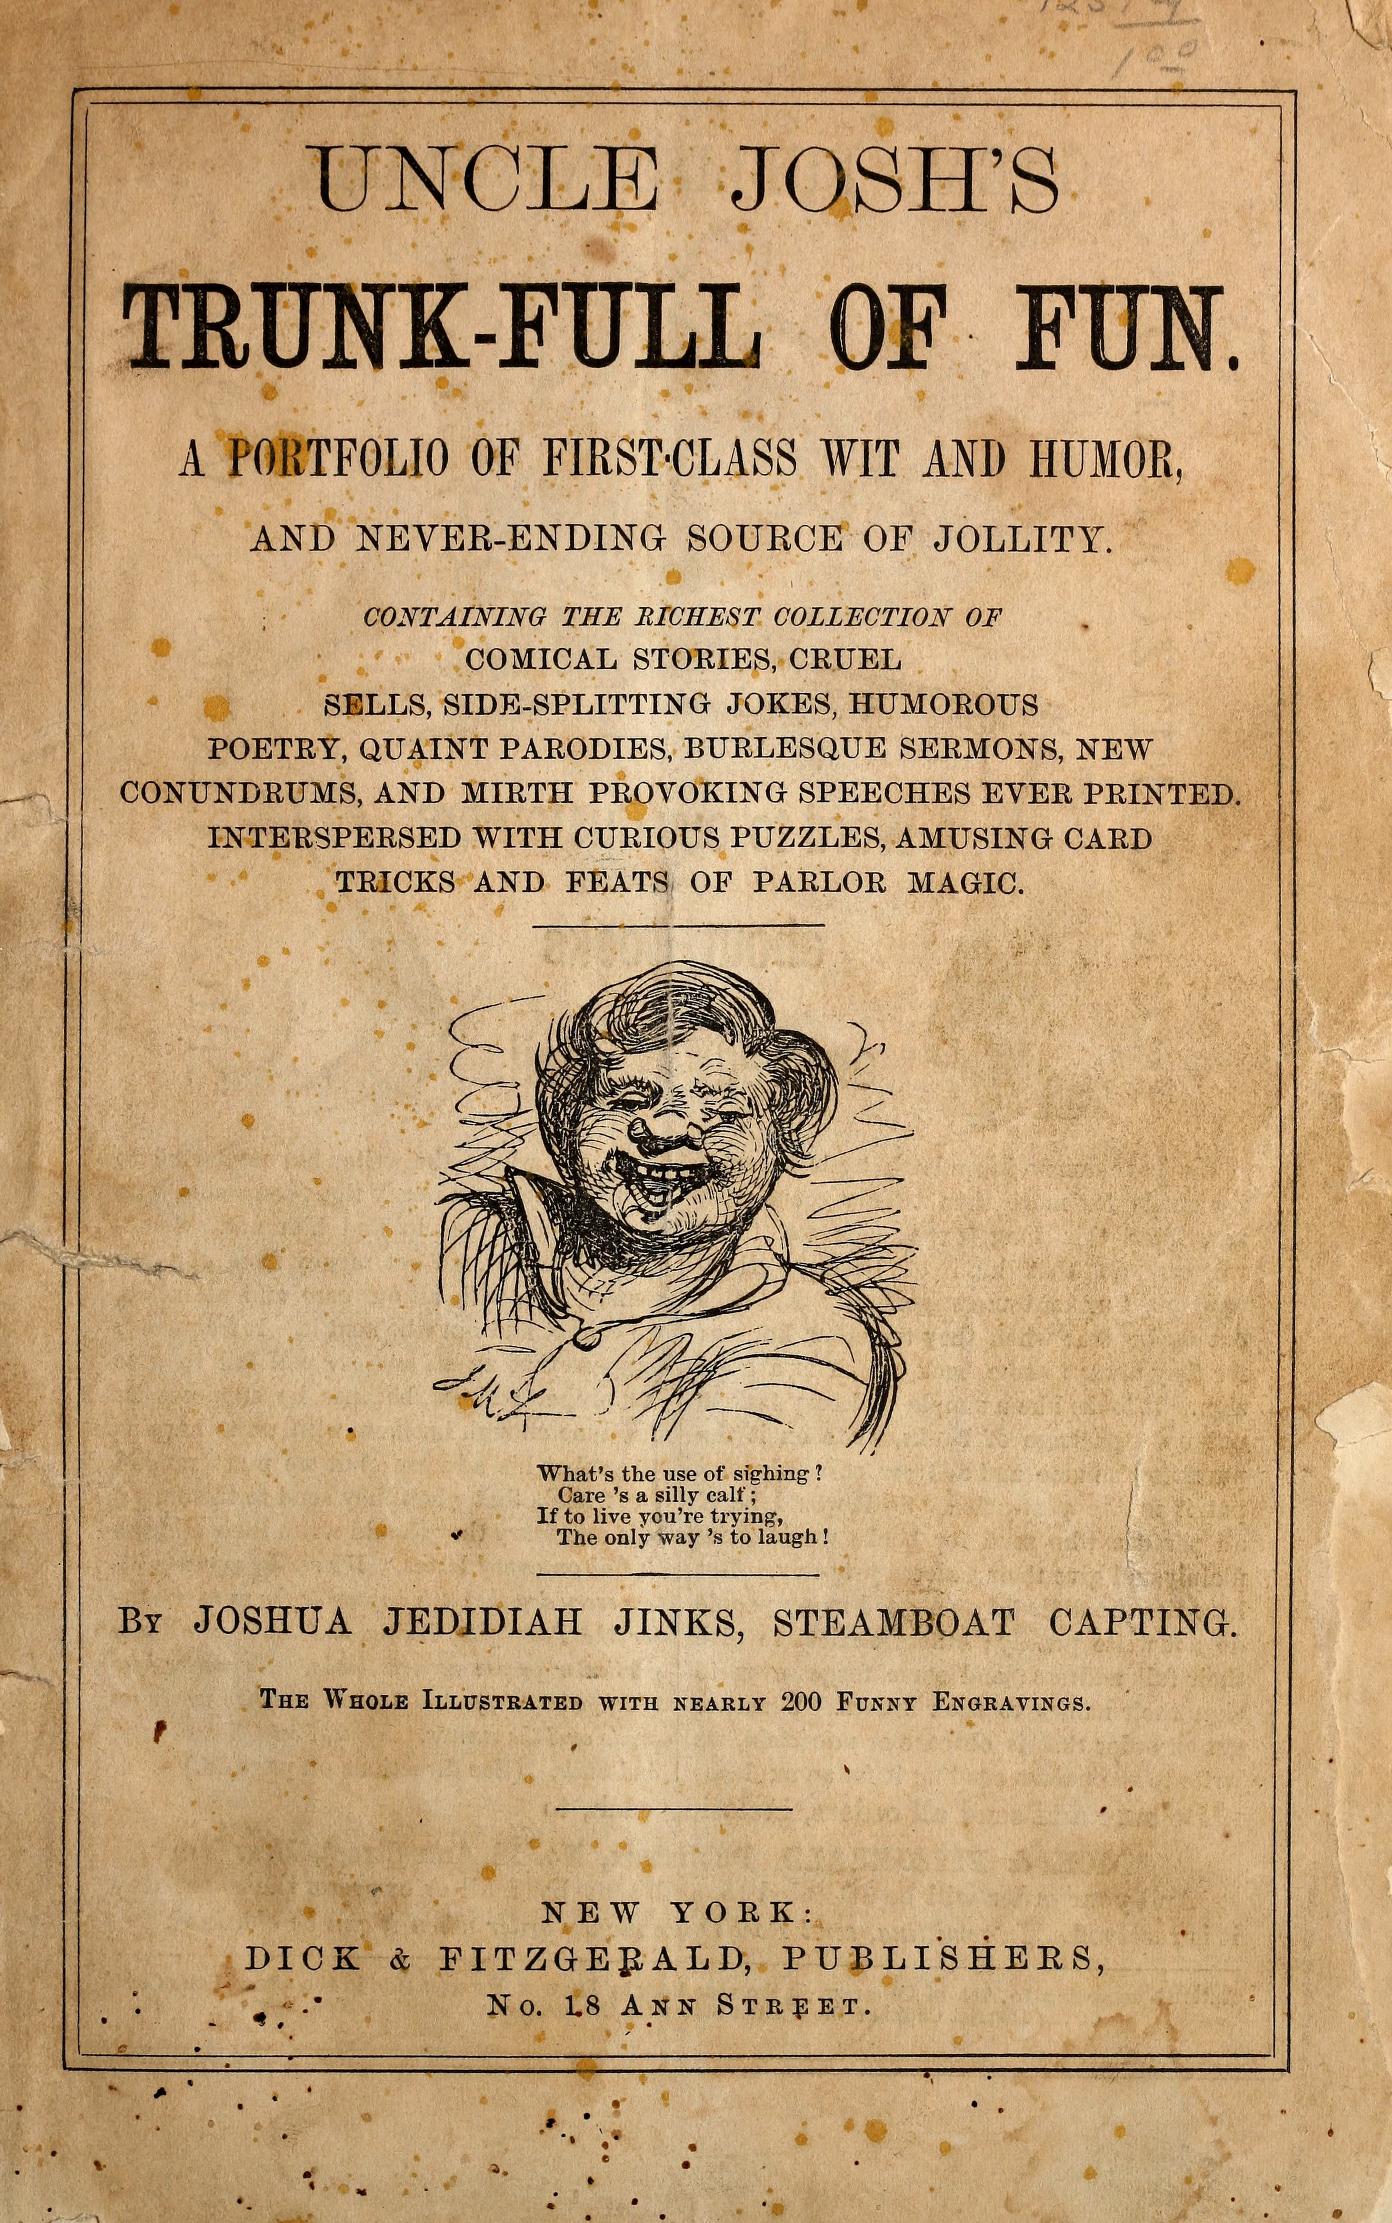 Uncle Josh's trunk-full of fun : a portfolio of first-class wit and humor,  and never-ending source of jollity : Dick, William B. (William Brisbane),  1827-1901 : Free Download, Borrow, and Streaming :